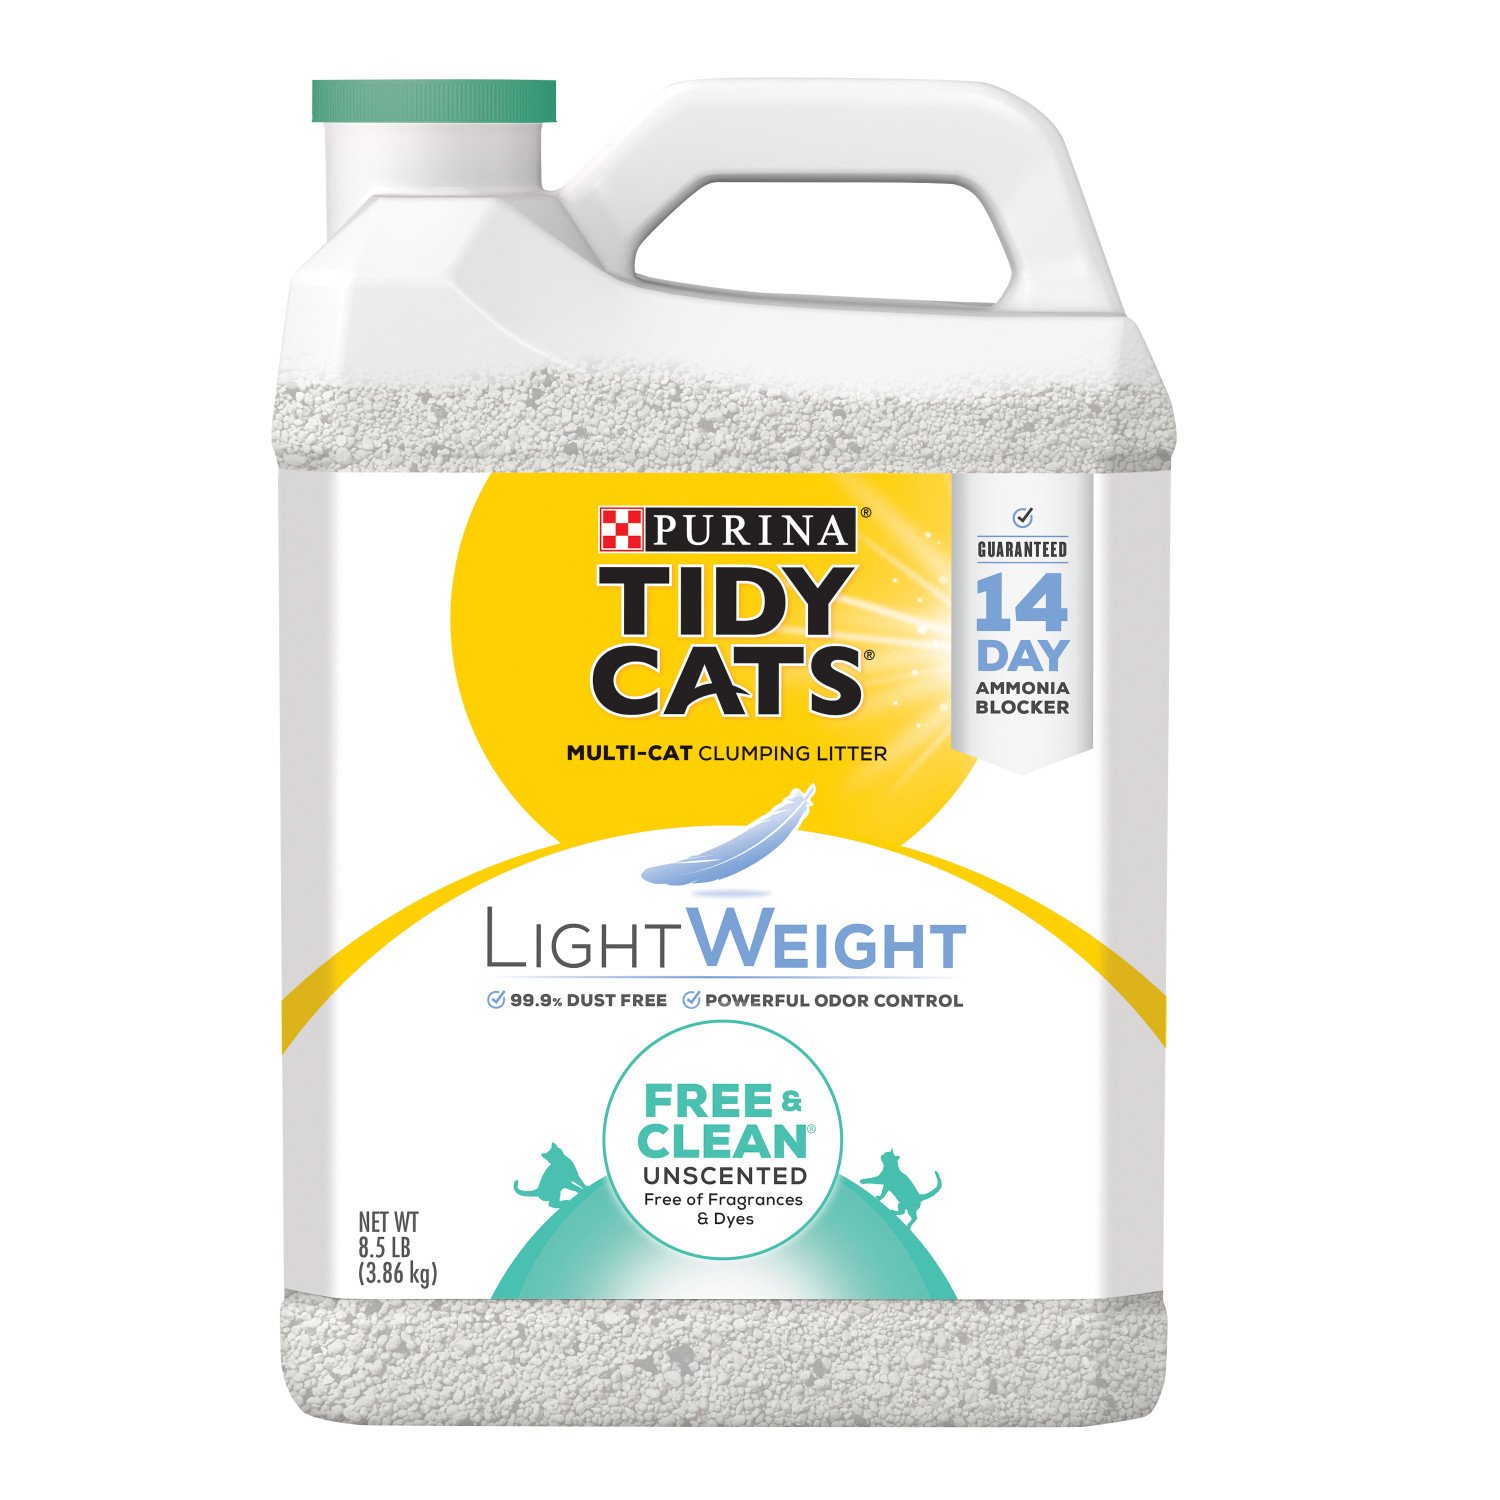 Purina Tidy Cats Free & Clean Unscented Light Weight Cat Litter Shop